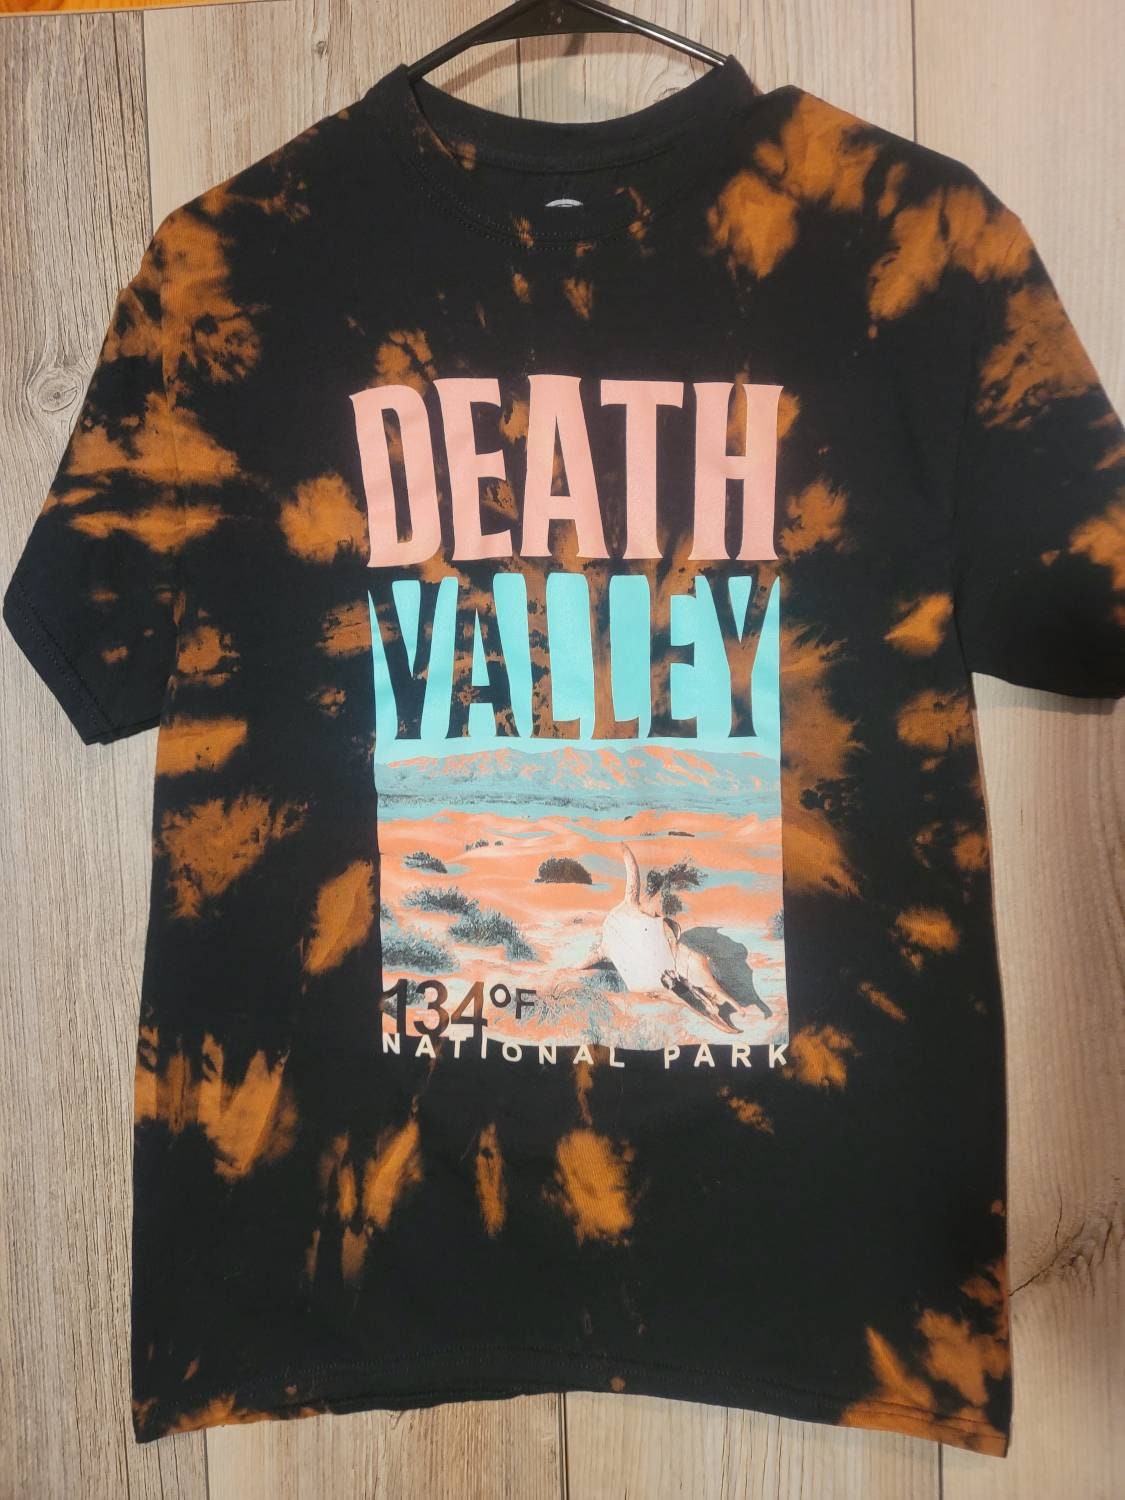 Discover Death Valley California National Park Vintage Inspired Unisex Tie Dye Tee